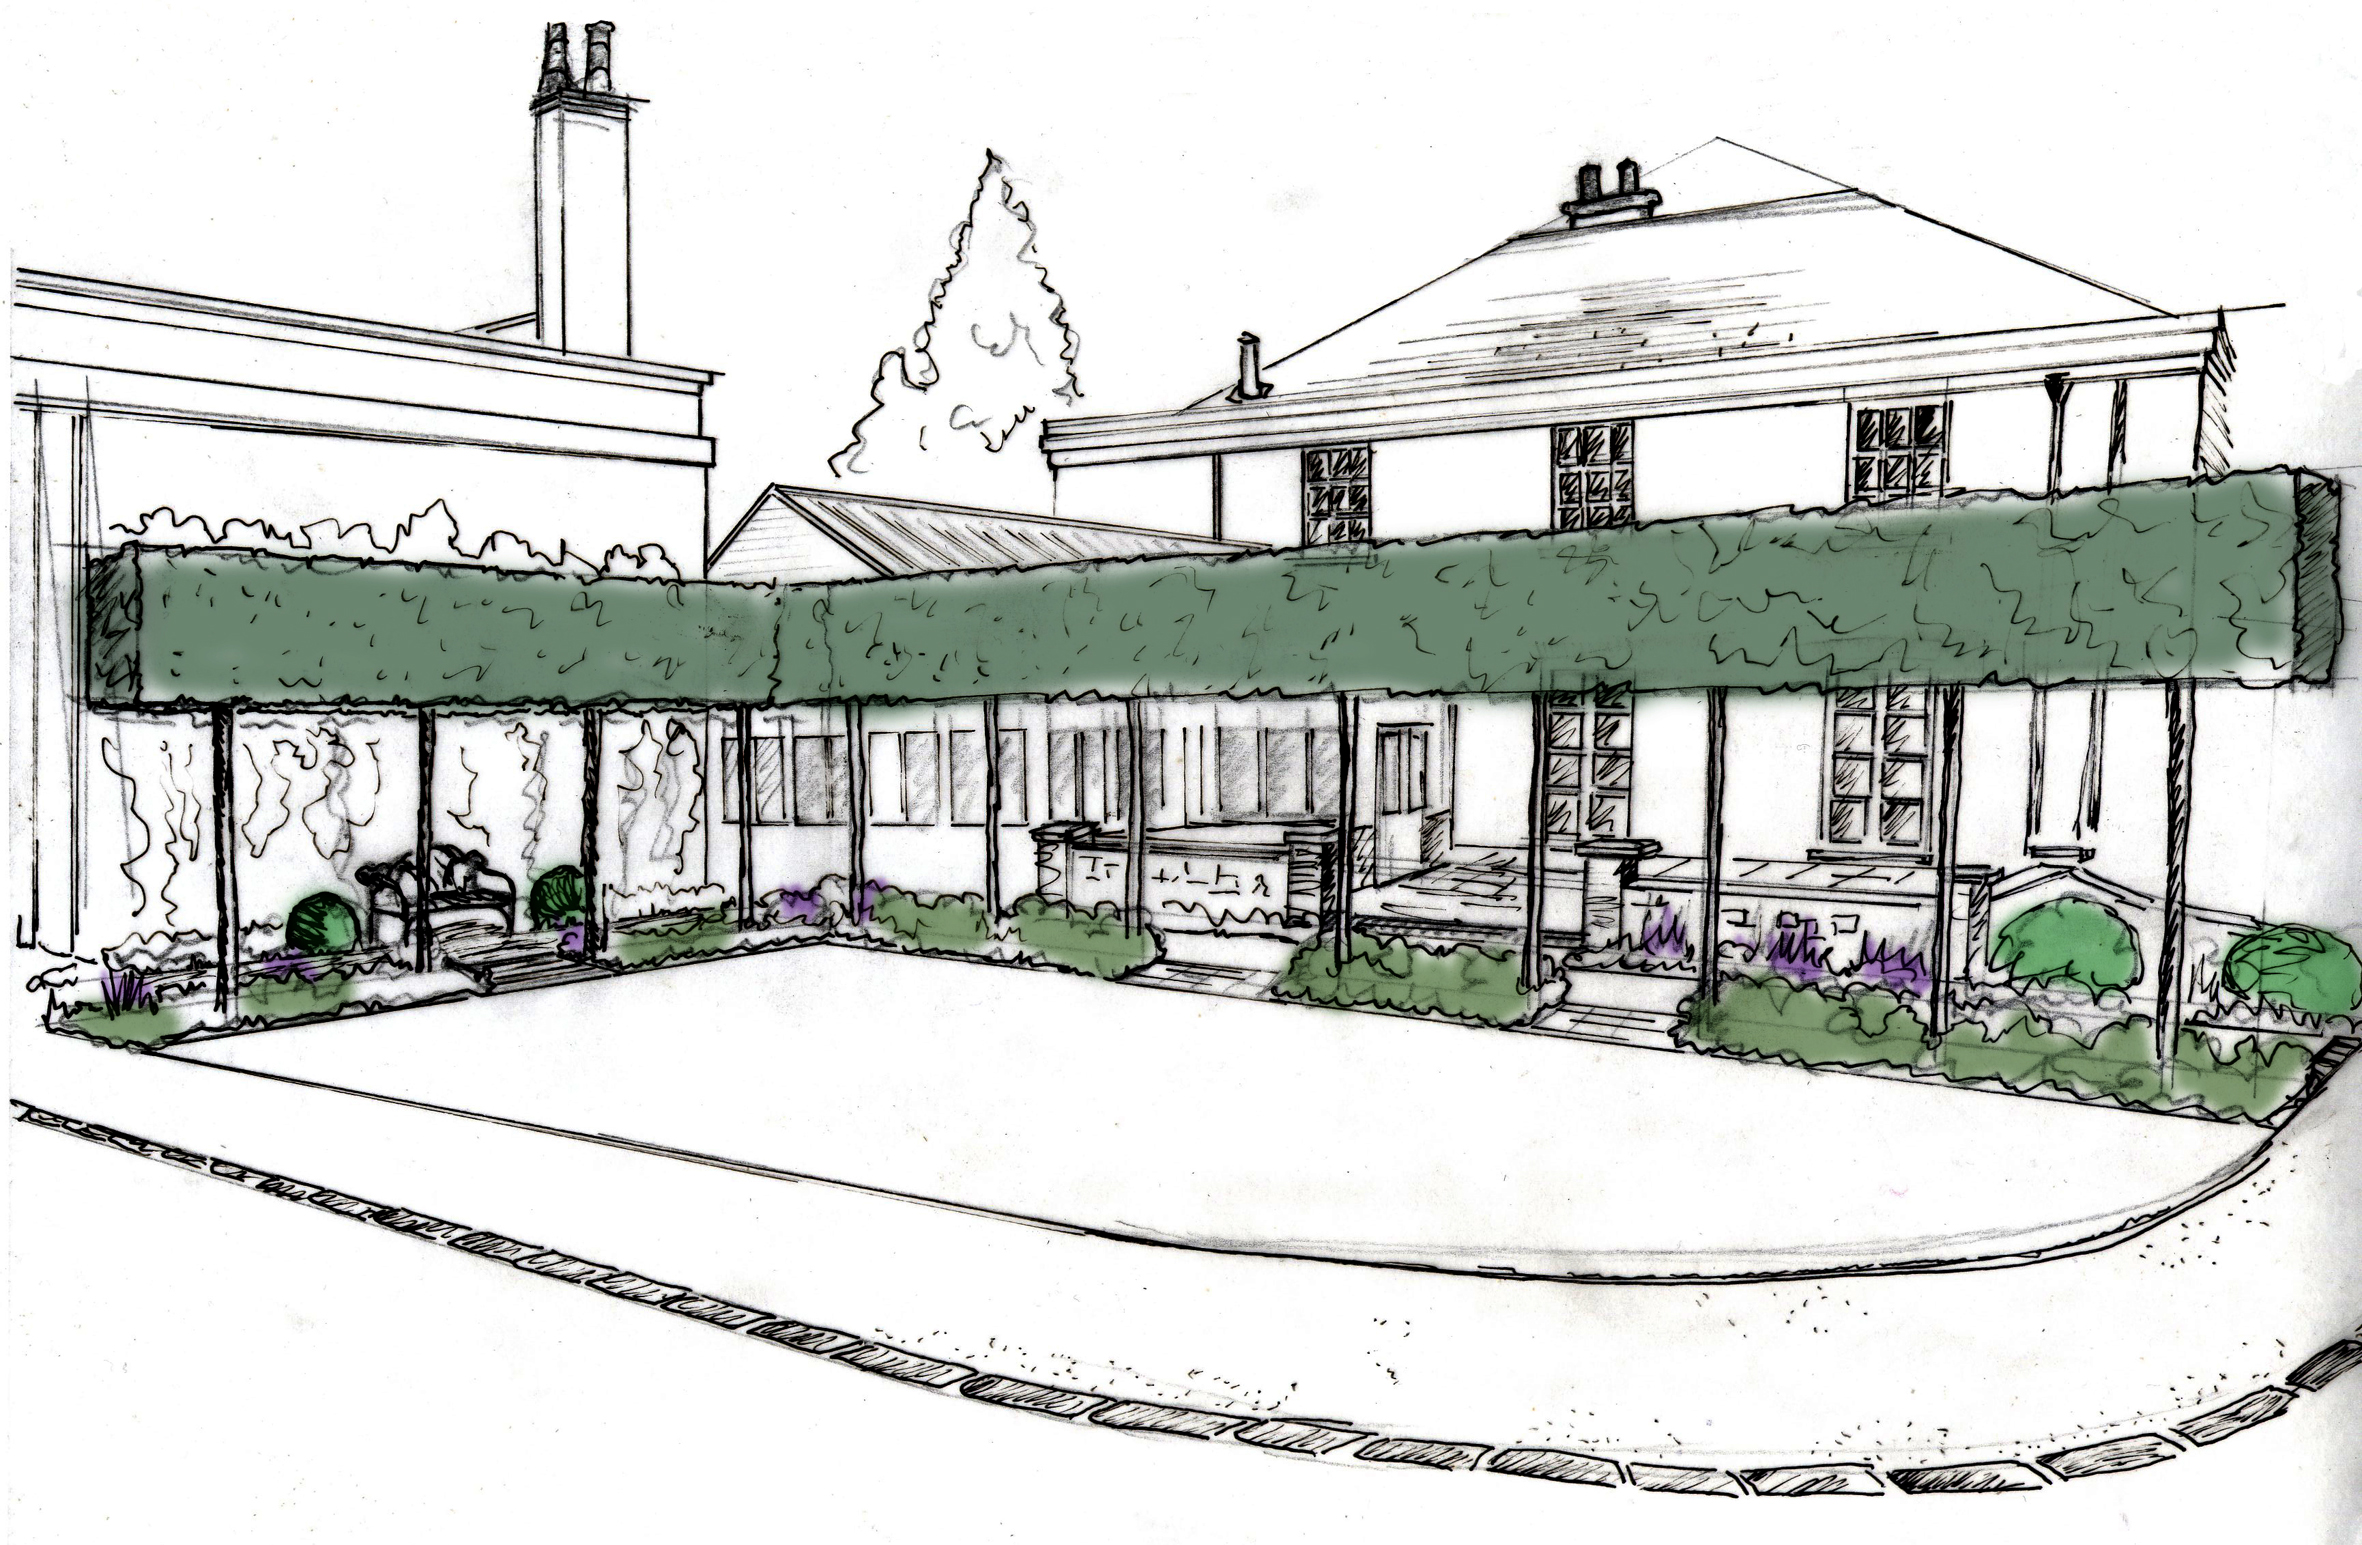 Concept Drawing for the Brasserie Garden, Whitworth Hall Hotel.